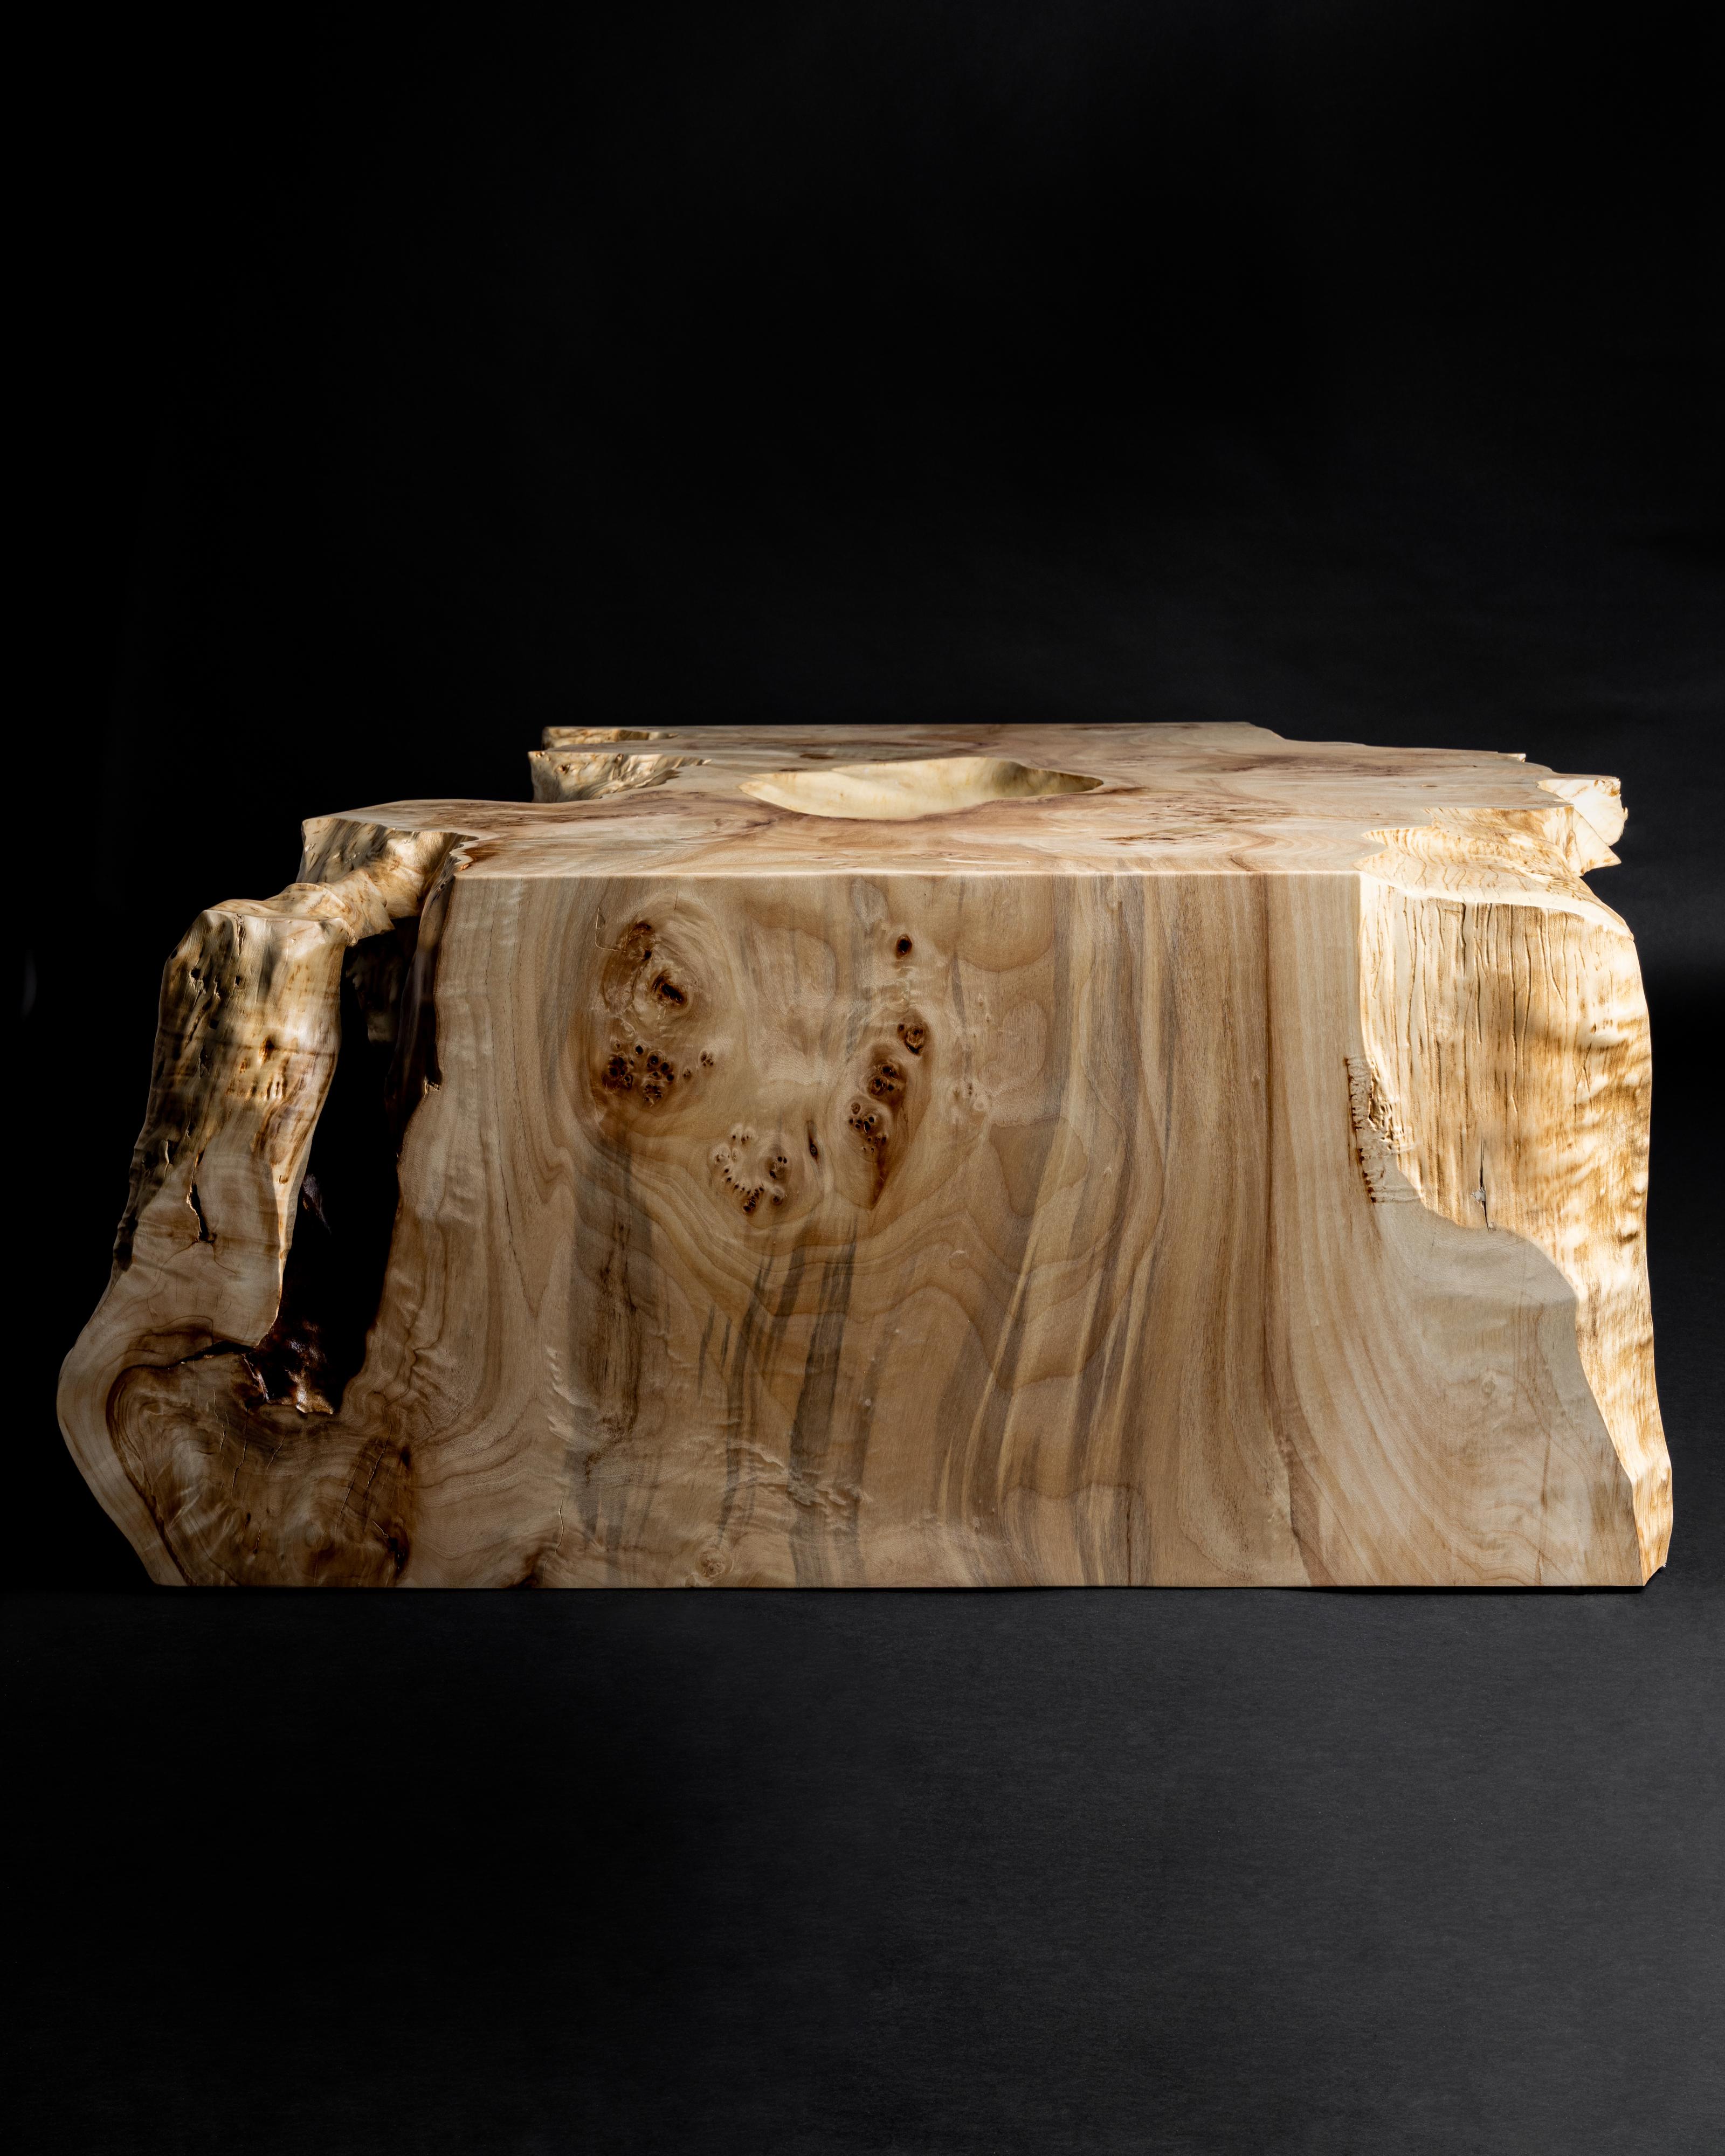 A huge single slab of French Mappa Burl folded to create a waterfall effect over the ends of the table. The live edge is wildly organic and a naturally occurring hollow adds dimension to the table top while remaining functional. 

The table as